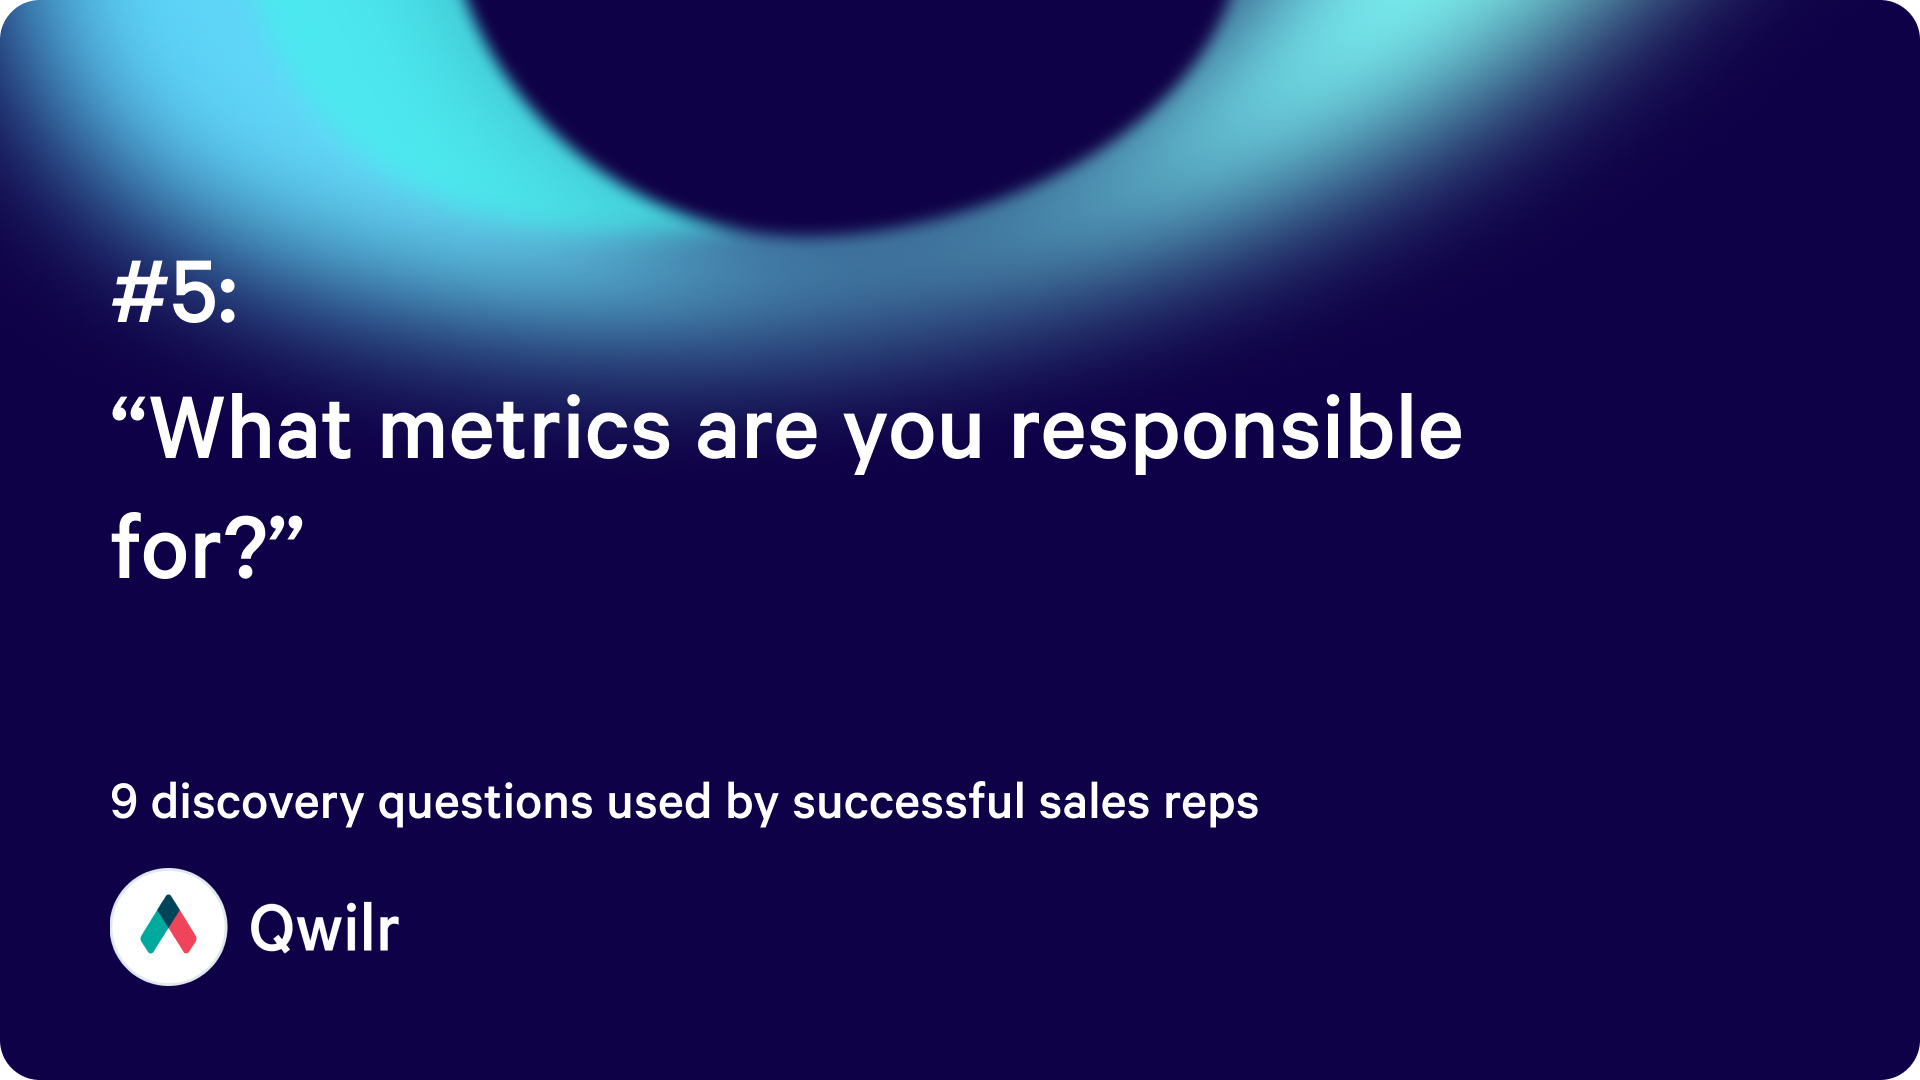 “What metrics are you responsible for?”